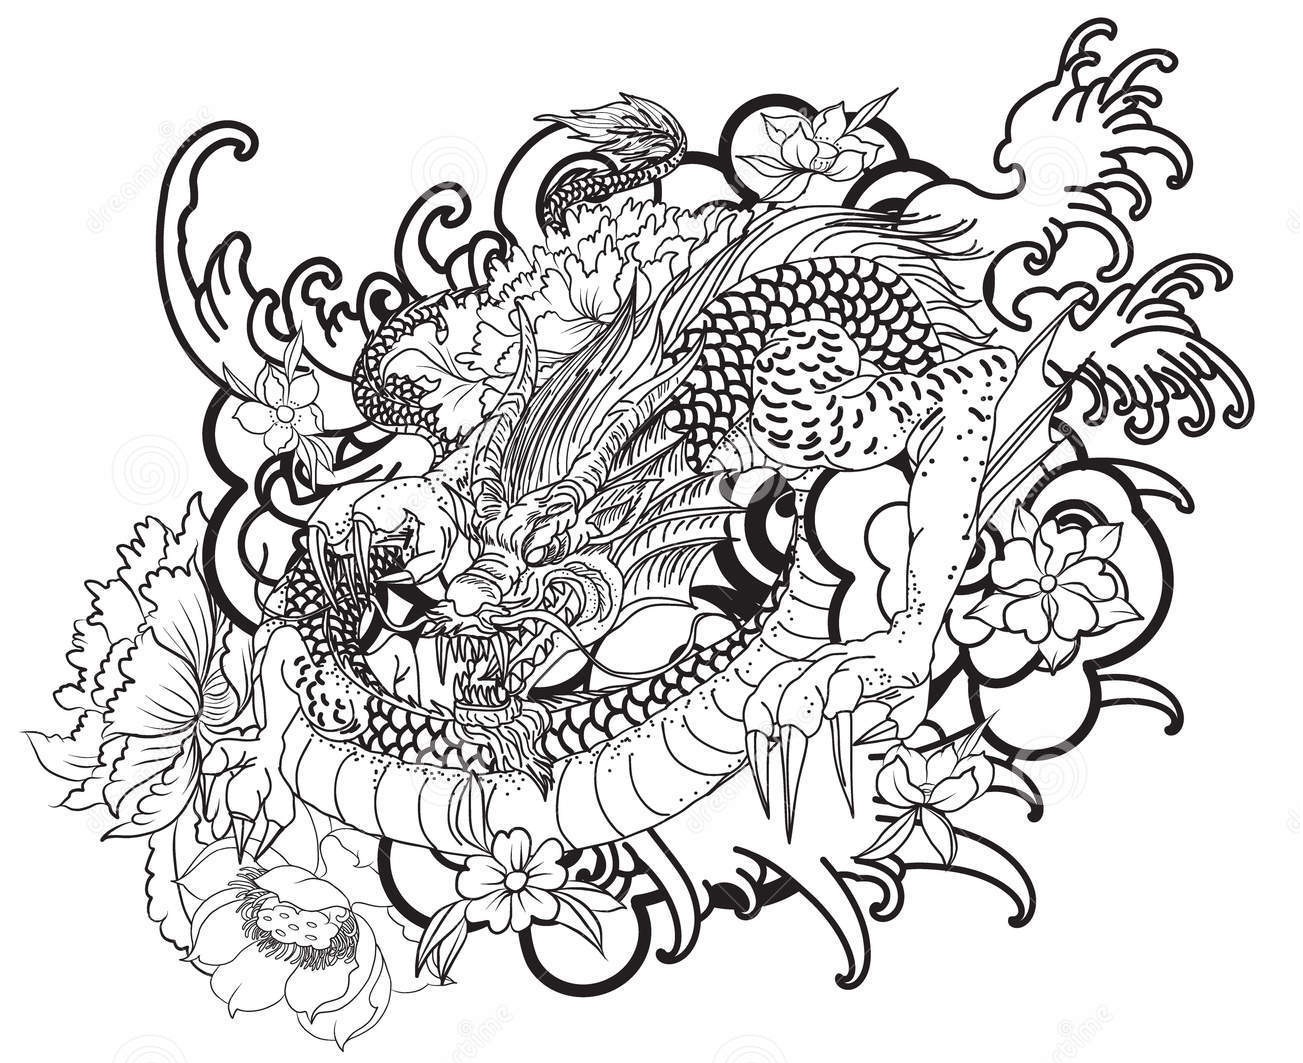 Download Coloring Pages For Kids And Adults